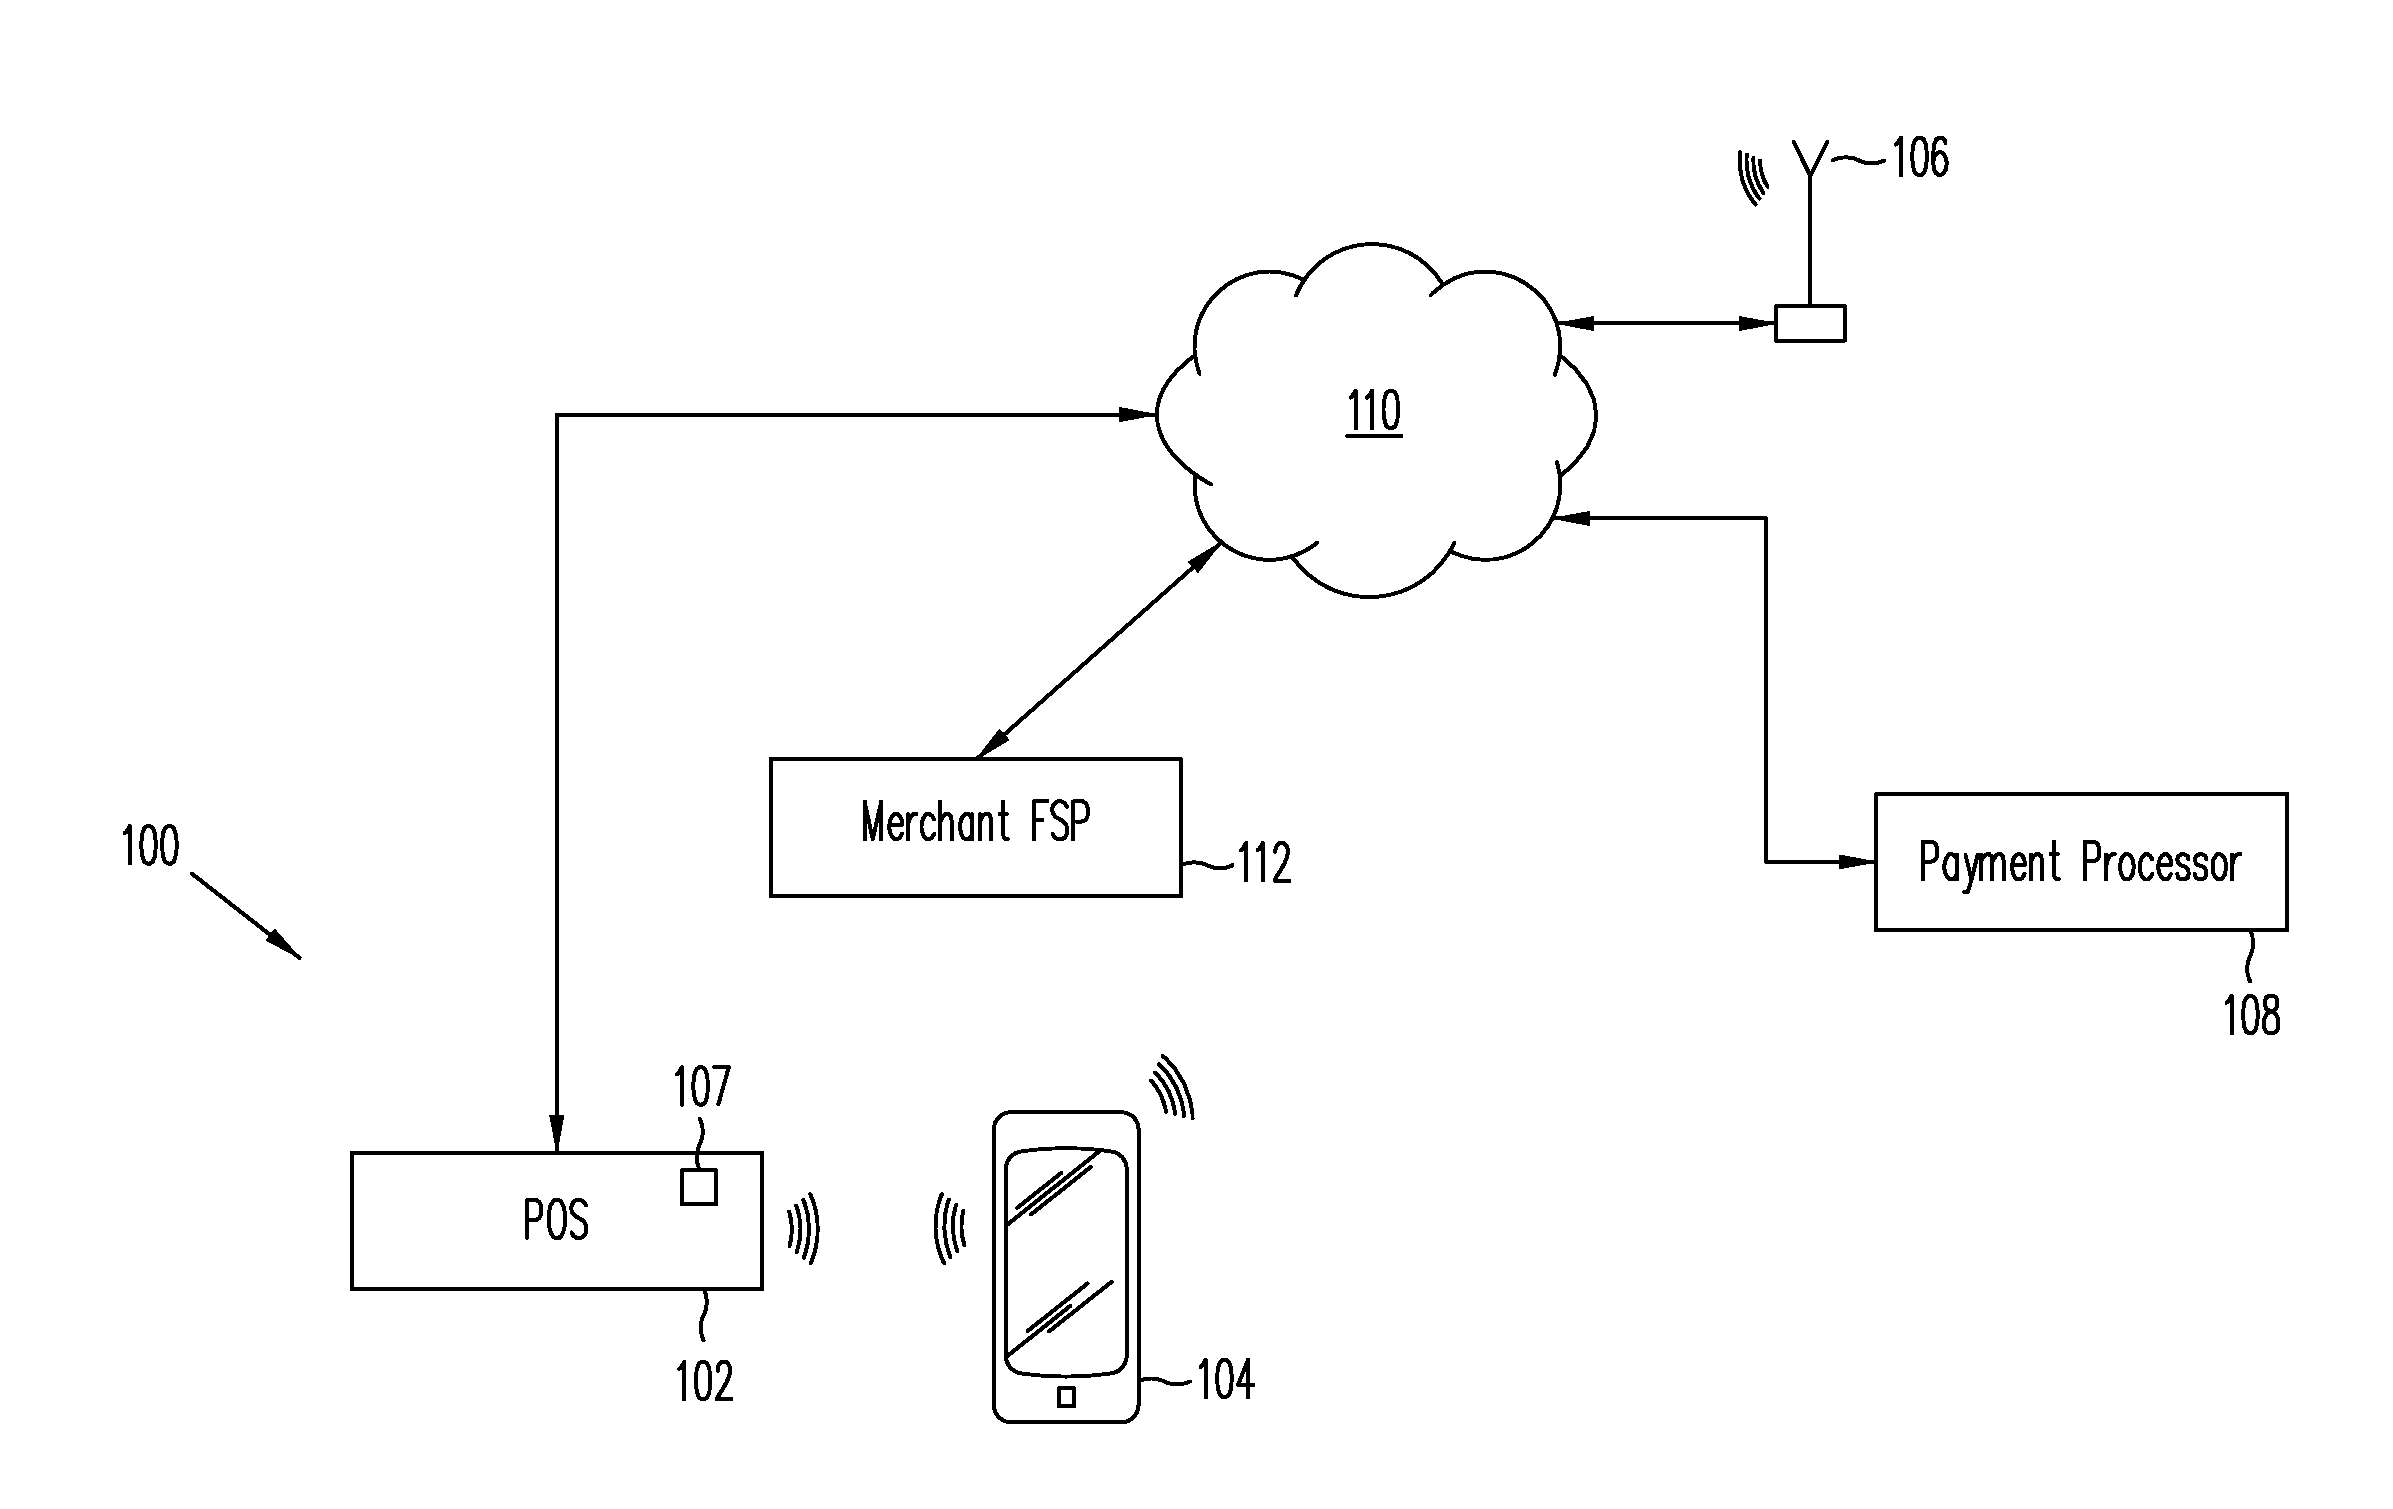 Systems, methods, and computer program products providing electronic communication during transactions